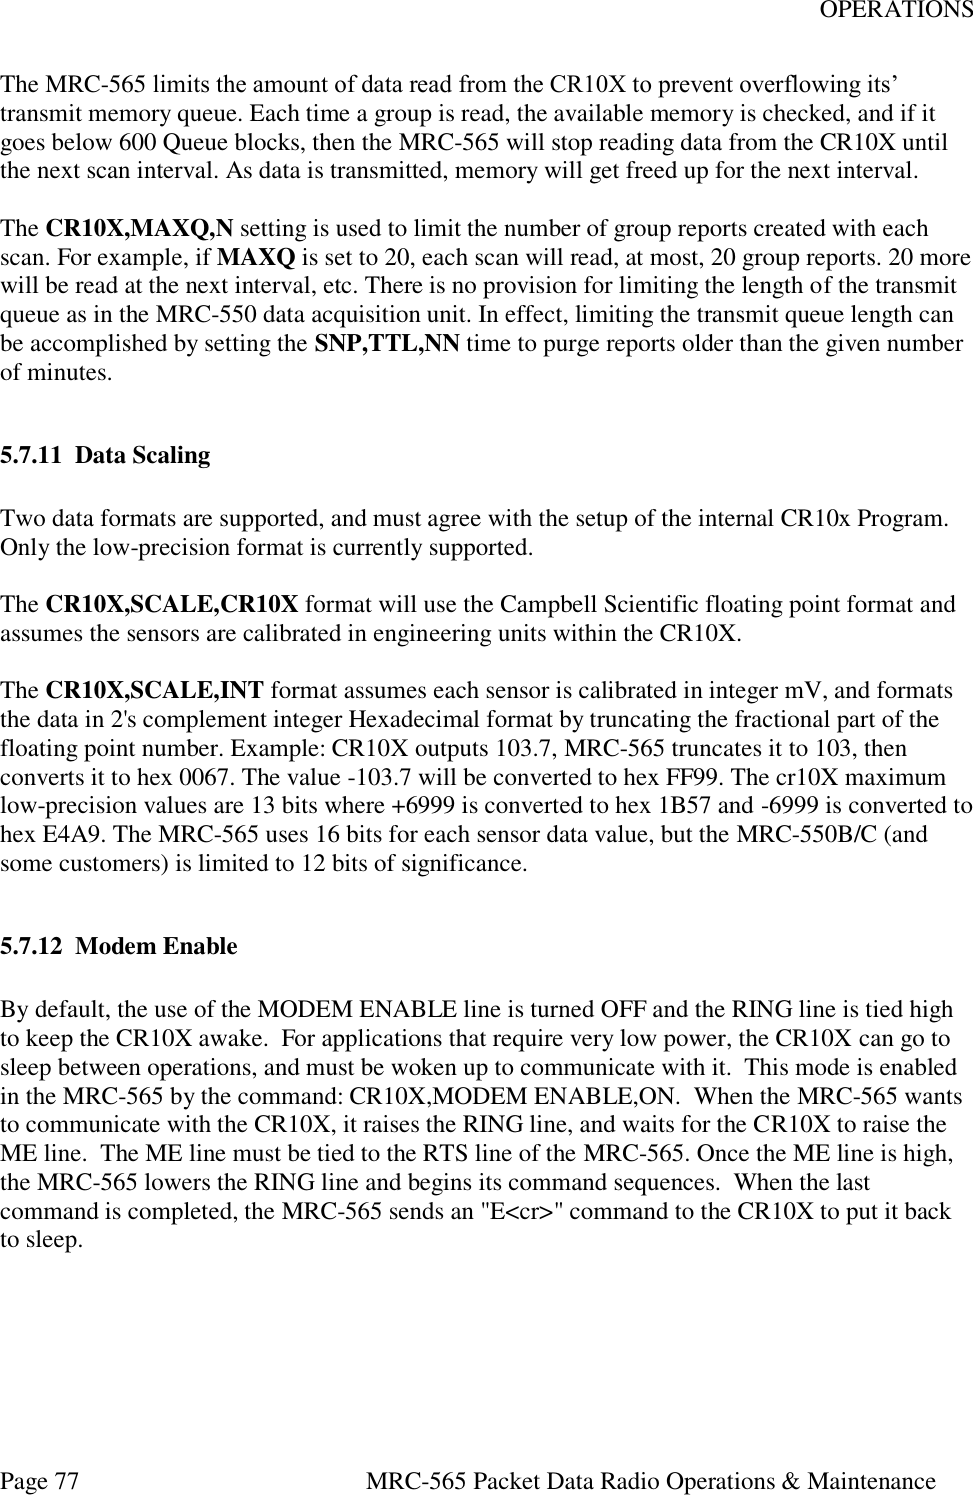 OPERATIONS Page 77  MRC-565 Packet Data Radio Operations &amp; Maintenance The MRC-565 limits the amount of data read from the CR10X to prevent overflowing its’ transmit memory queue. Each time a group is read, the available memory is checked, and if it goes below 600 Queue blocks, then the MRC-565 will stop reading data from the CR10X until the next scan interval. As data is transmitted, memory will get freed up for the next interval.   The CR10X,MAXQ,N setting is used to limit the number of group reports created with each scan. For example, if MAXQ is set to 20, each scan will read, at most, 20 group reports. 20 more will be read at the next interval, etc. There is no provision for limiting the length of the transmit queue as in the MRC-550 data acquisition unit. In effect, limiting the transmit queue length can be accomplished by setting the SNP,TTL,NN time to purge reports older than the given number of minutes.   5.7.11 Data Scaling  Two data formats are supported, and must agree with the setup of the internal CR10x Program. Only the low-precision format is currently supported.   The CR10X,SCALE,CR10X format will use the Campbell Scientific floating point format and assumes the sensors are calibrated in engineering units within the CR10X.   The CR10X,SCALE,INT format assumes each sensor is calibrated in integer mV, and formats the data in 2&apos;s complement integer Hexadecimal format by truncating the fractional part of the floating point number. Example: CR10X outputs 103.7, MRC-565 truncates it to 103, then converts it to hex 0067. The value -103.7 will be converted to hex FF99. The cr10X maximum low-precision values are 13 bits where +6999 is converted to hex 1B57 and -6999 is converted to hex E4A9. The MRC-565 uses 16 bits for each sensor data value, but the MRC-550B/C (and some customers) is limited to 12 bits of significance.   5.7.12 Modem Enable  By default, the use of the MODEM ENABLE line is turned OFF and the RING line is tied high to keep the CR10X awake.  For applications that require very low power, the CR10X can go to sleep between operations, and must be woken up to communicate with it.  This mode is enabled in the MRC-565 by the command: CR10X,MODEM ENABLE,ON.  When the MRC-565 wants to communicate with the CR10X, it raises the RING line, and waits for the CR10X to raise the ME line.  The ME line must be tied to the RTS line of the MRC-565. Once the ME line is high, the MRC-565 lowers the RING line and begins its command sequences.  When the last command is completed, the MRC-565 sends an &quot;E&lt;cr&gt;&quot; command to the CR10X to put it back to sleep.  